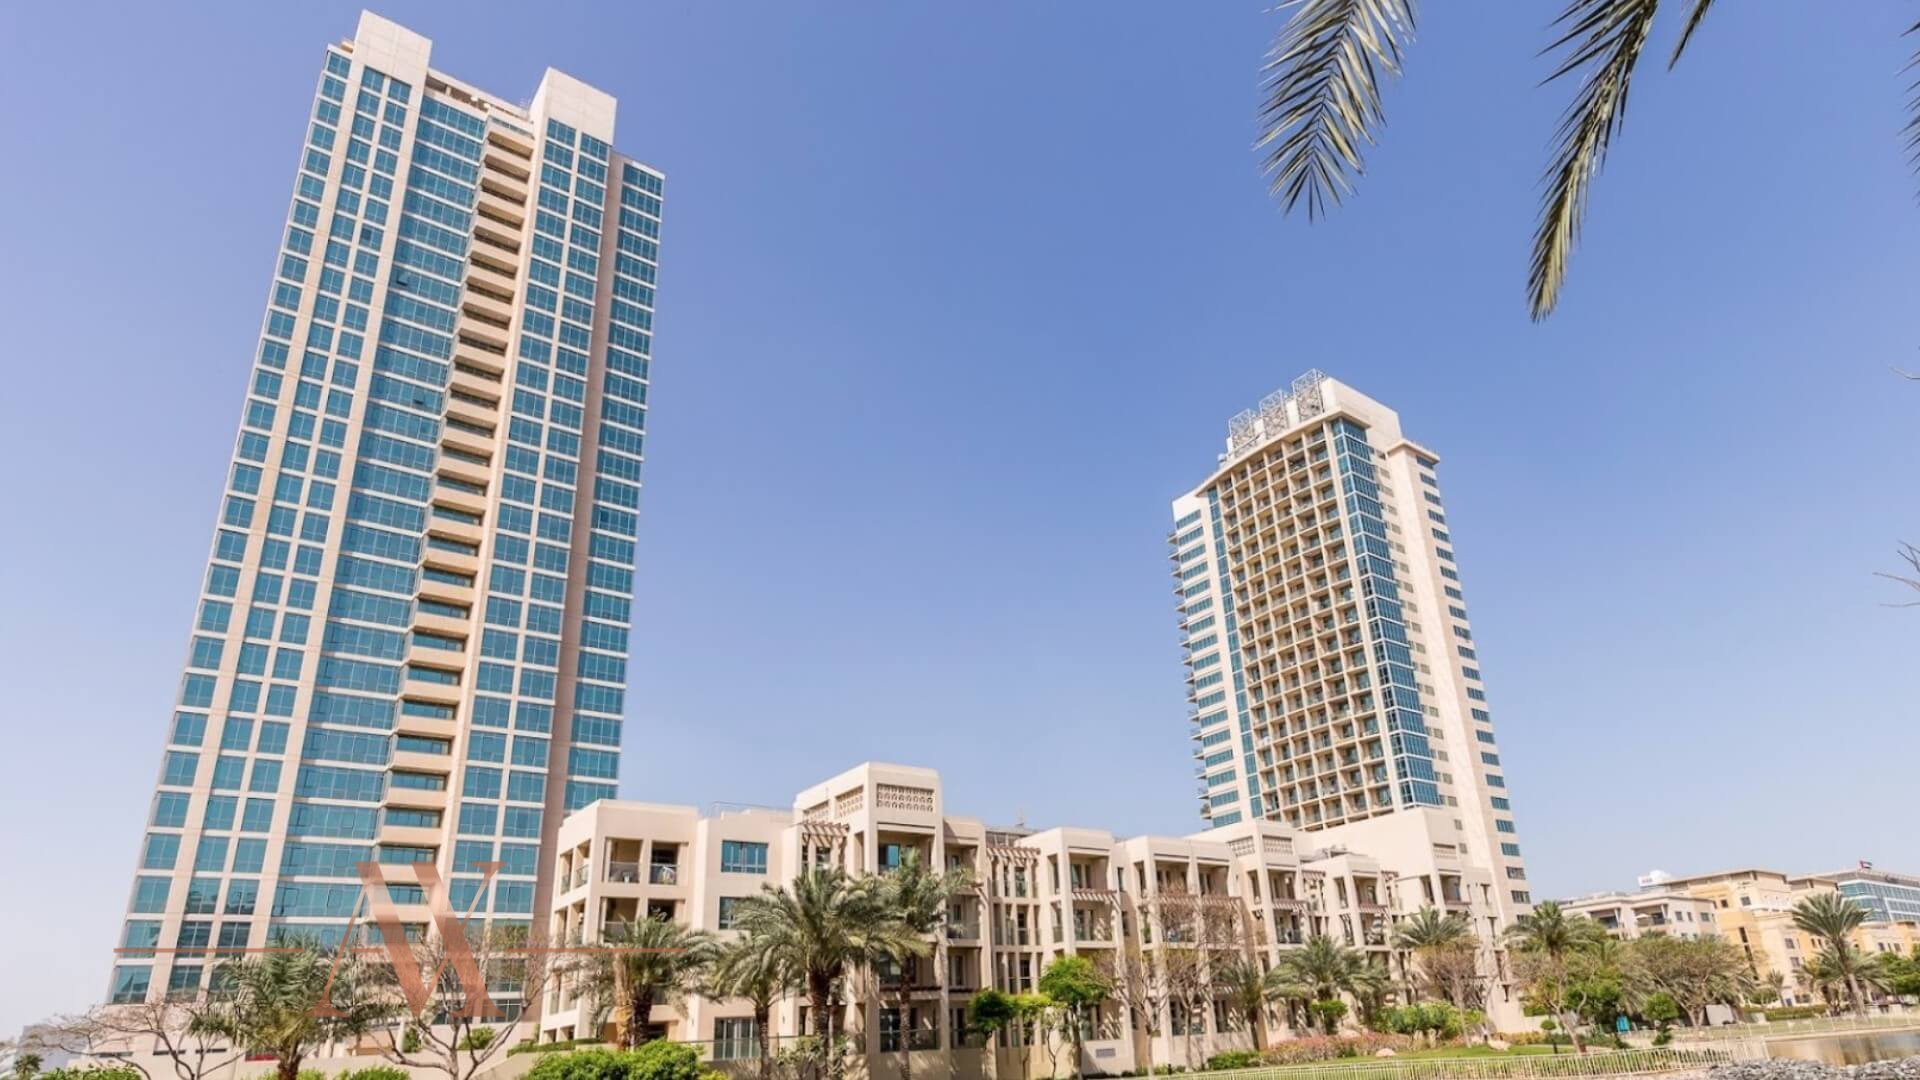 GOLF TOWERS property for sale with Bitcoin & Cryptocurrency - 1